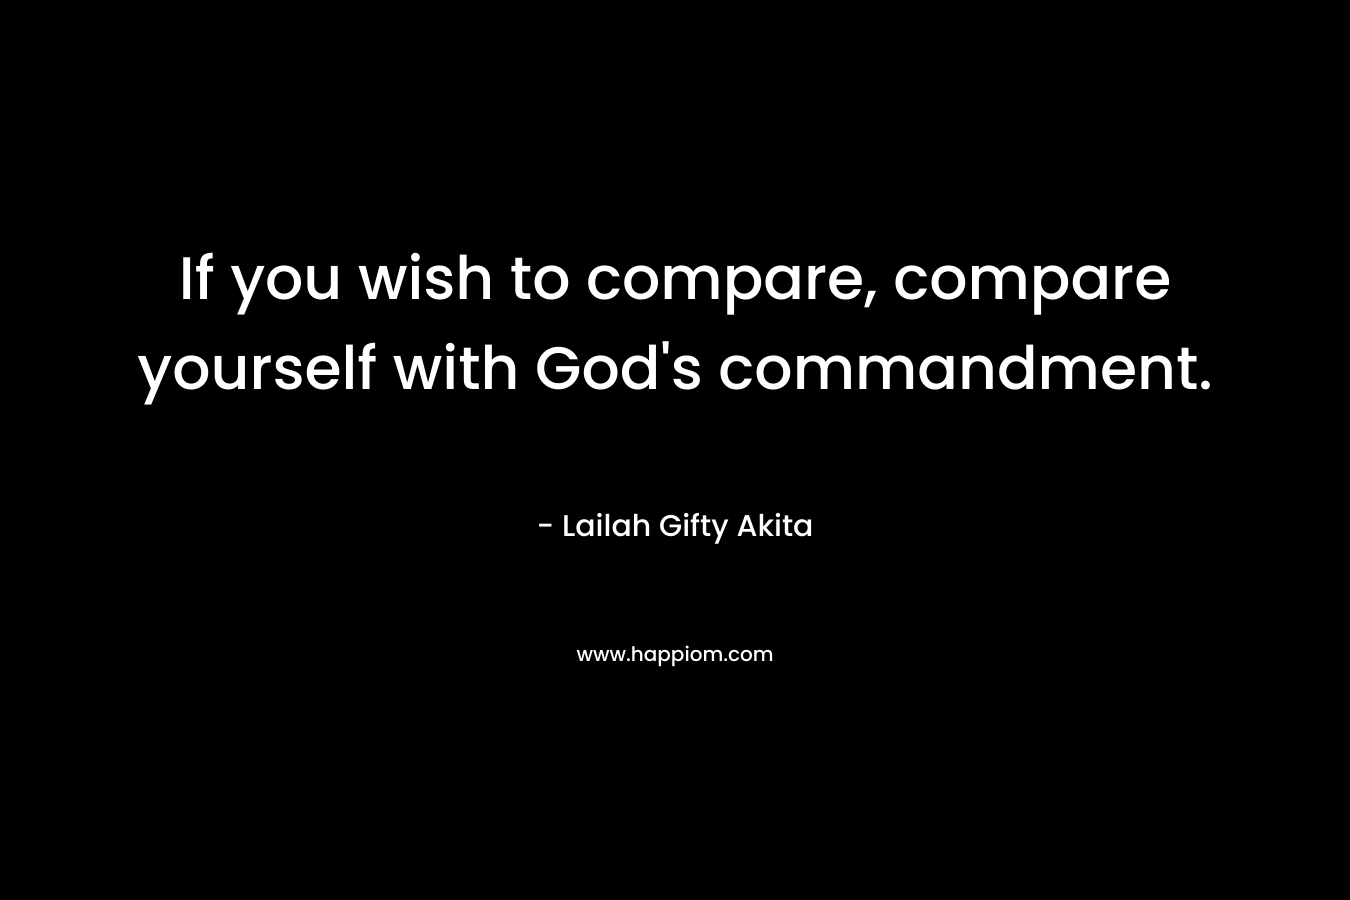 If you wish to compare, compare yourself with God's commandment.